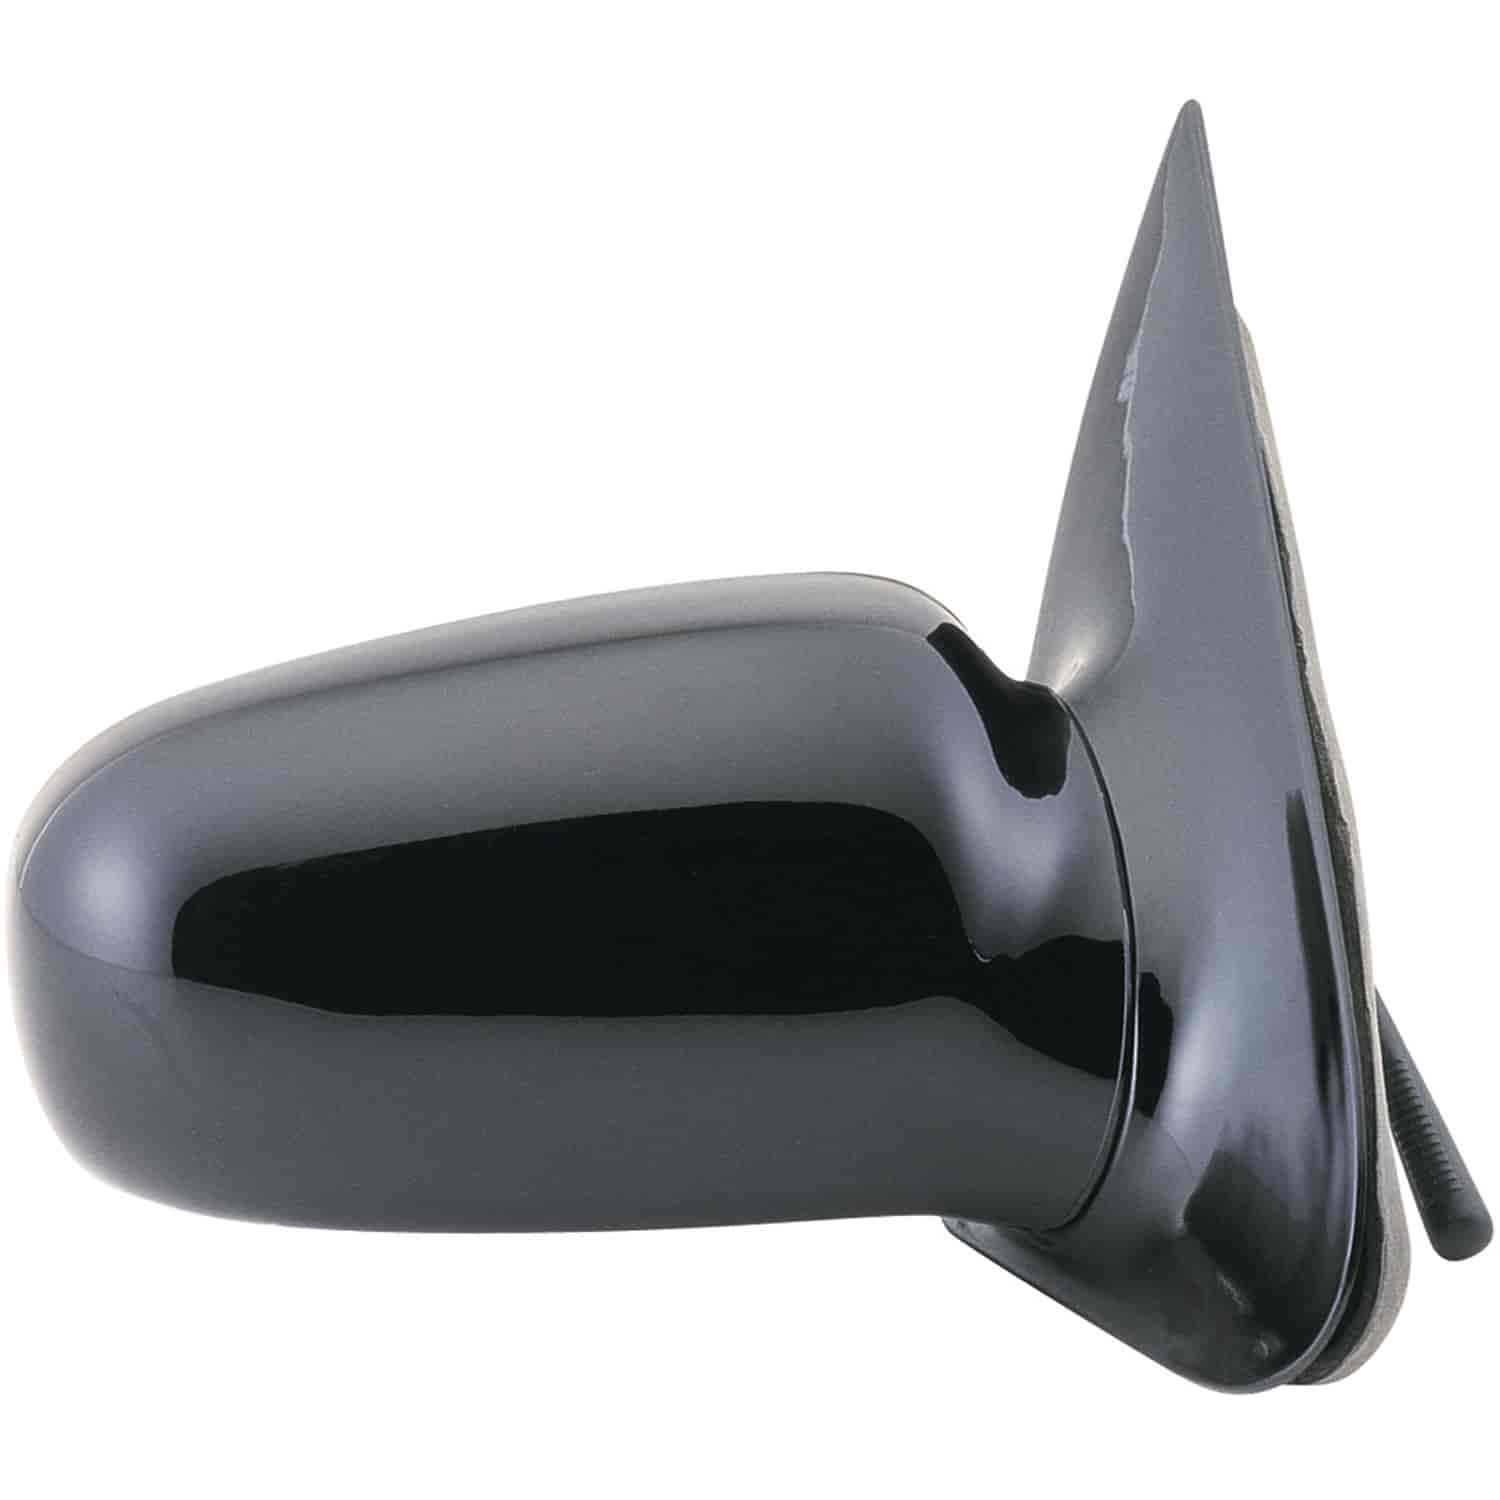 OEM Style Replacement mirror for 95-05 Chevy Cavalier